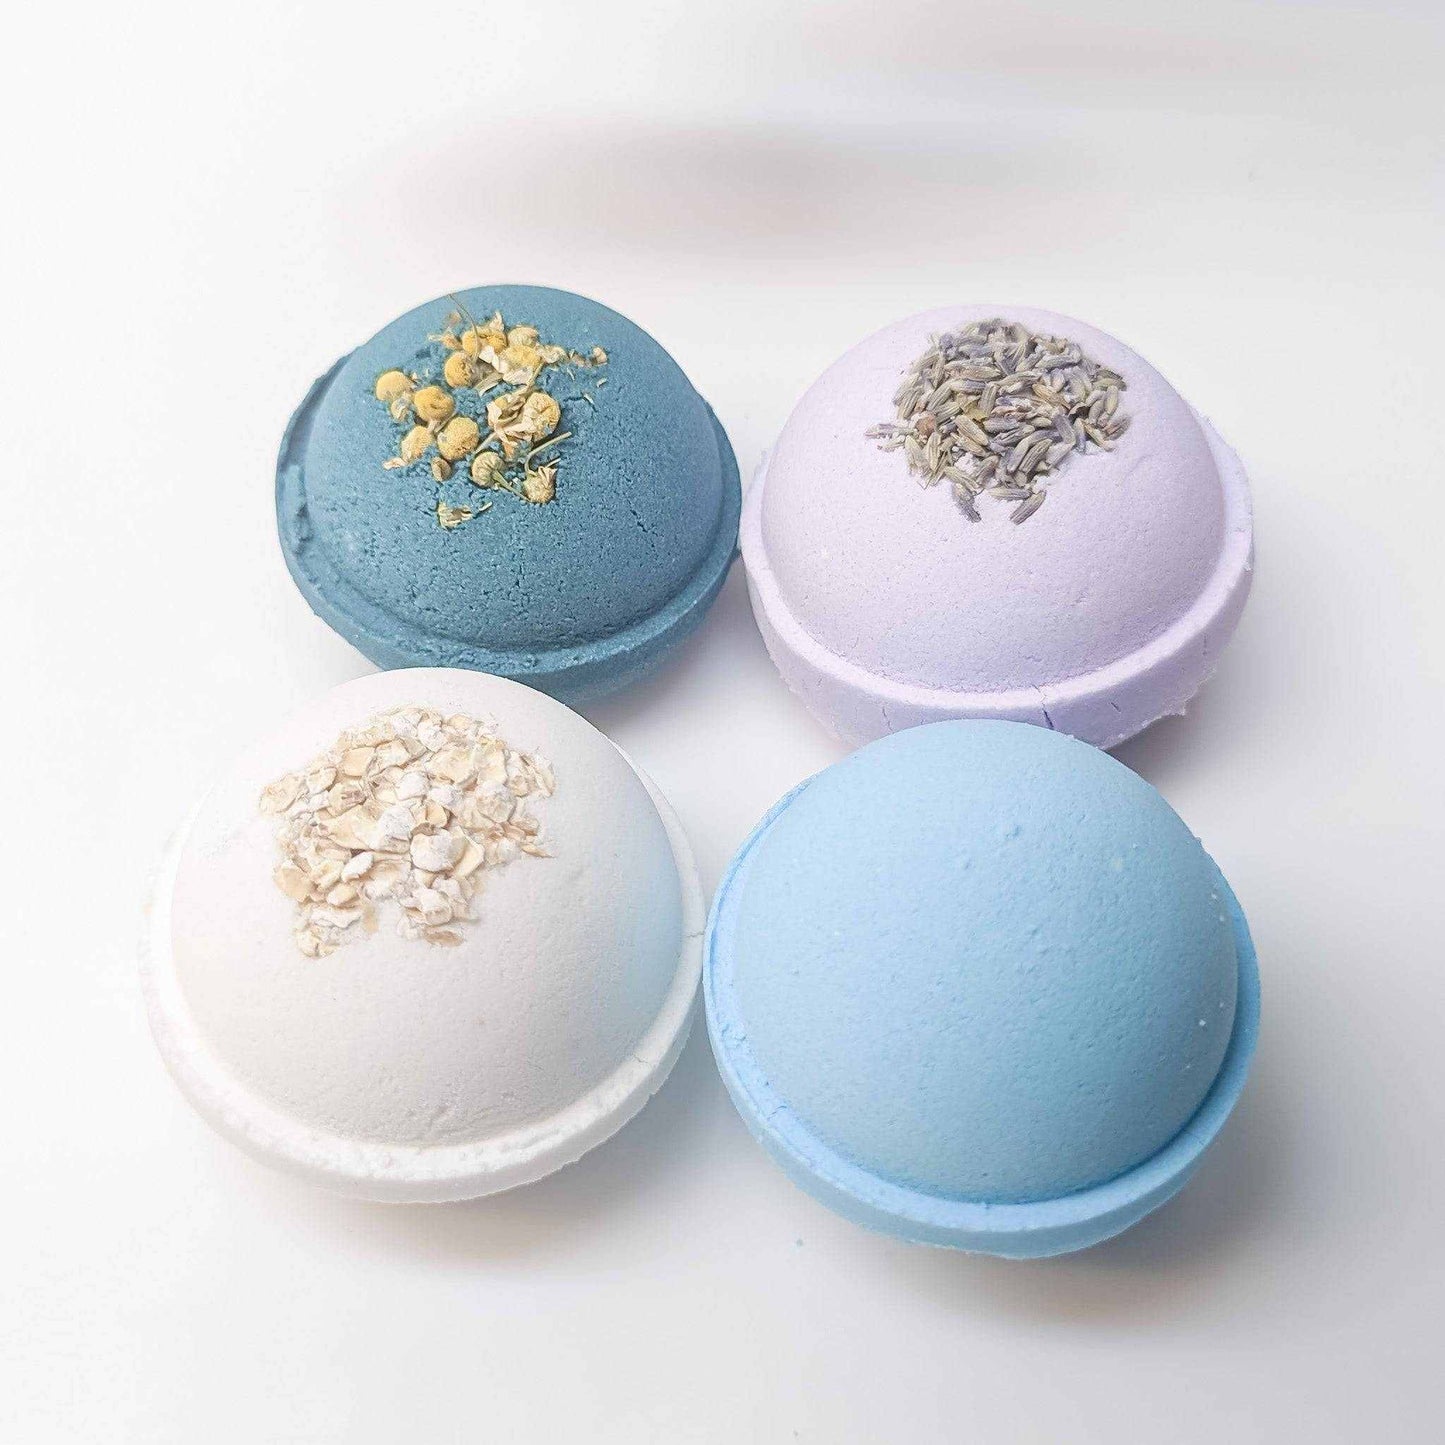 Bay Rum Bath BombBath BombsCG Pure WashRevitalizing Bay Rum Bath Bomb
Immerse yourself in a sensory voyage with our Bay Rum Bath Bomb, designed to transform your bath time into an invigorating oasis. The 